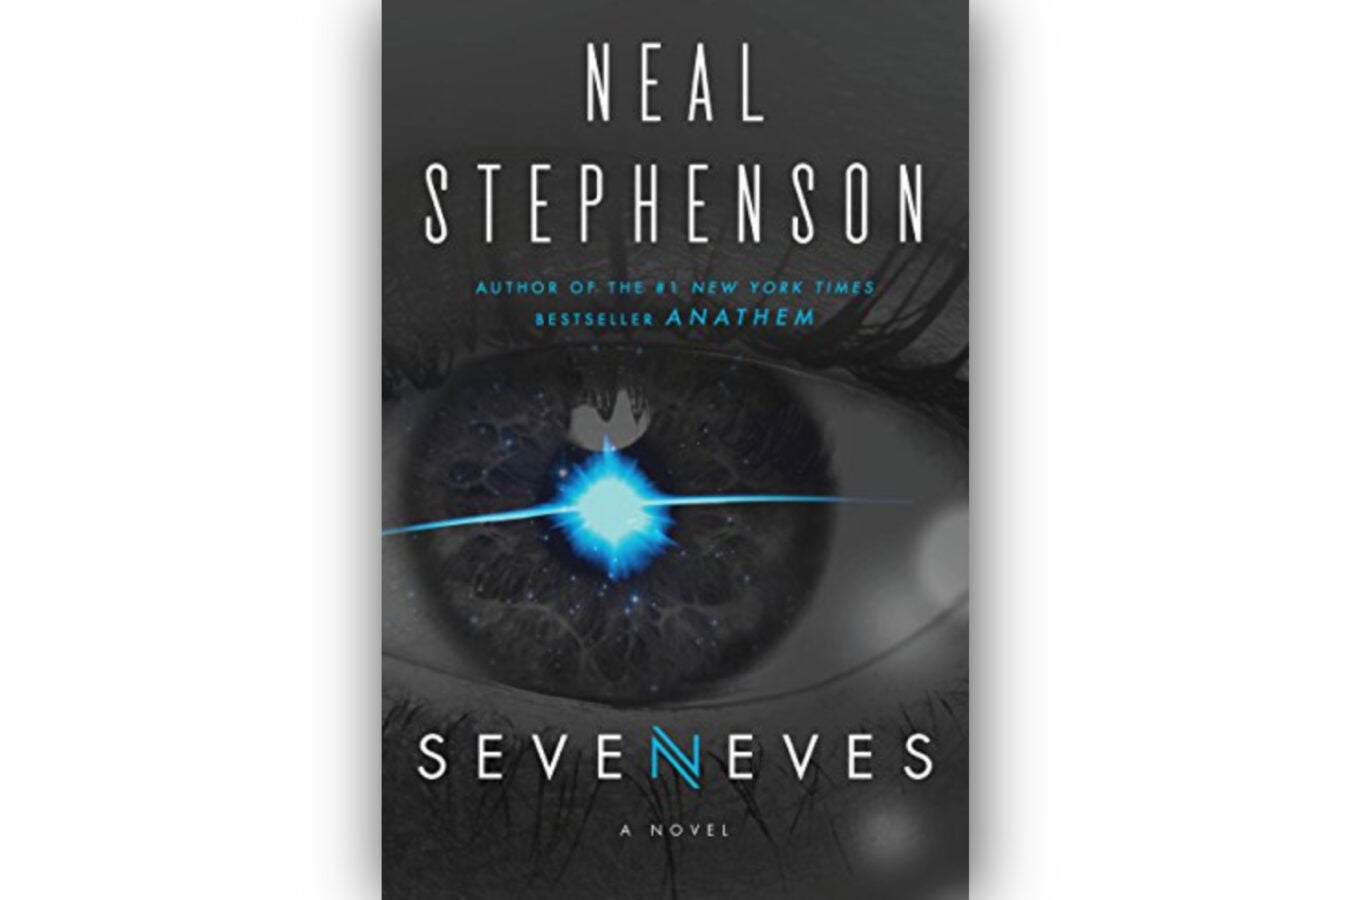 Book cover: "Seveneves” by Neal Stephenson.